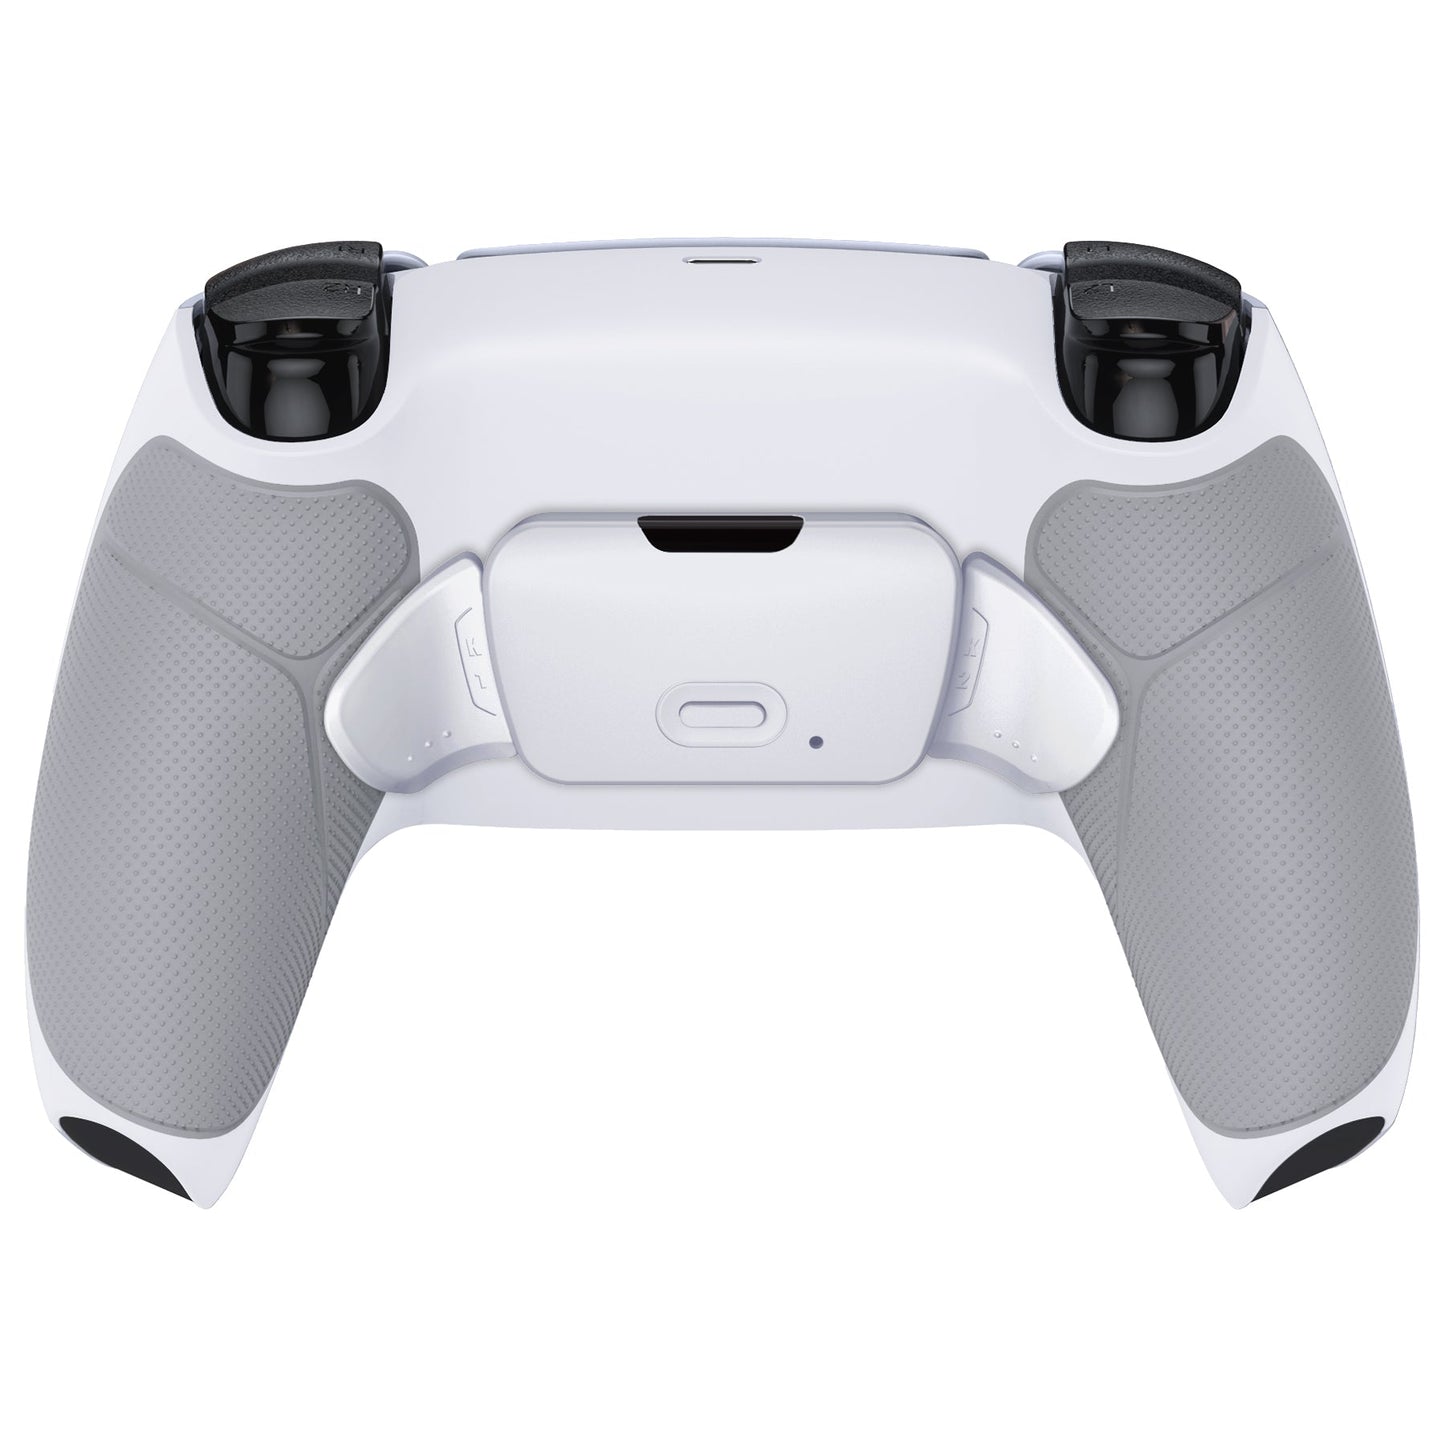 eXtremeRate Retail White Rubberized Grip Back Paddles Remappable Rise Remap Kit with Upgrade Board & Redesigned Back Shell & Back Buttons Attachment for PS5 Controller BDM-010 & BDM-020 - XPFU6002